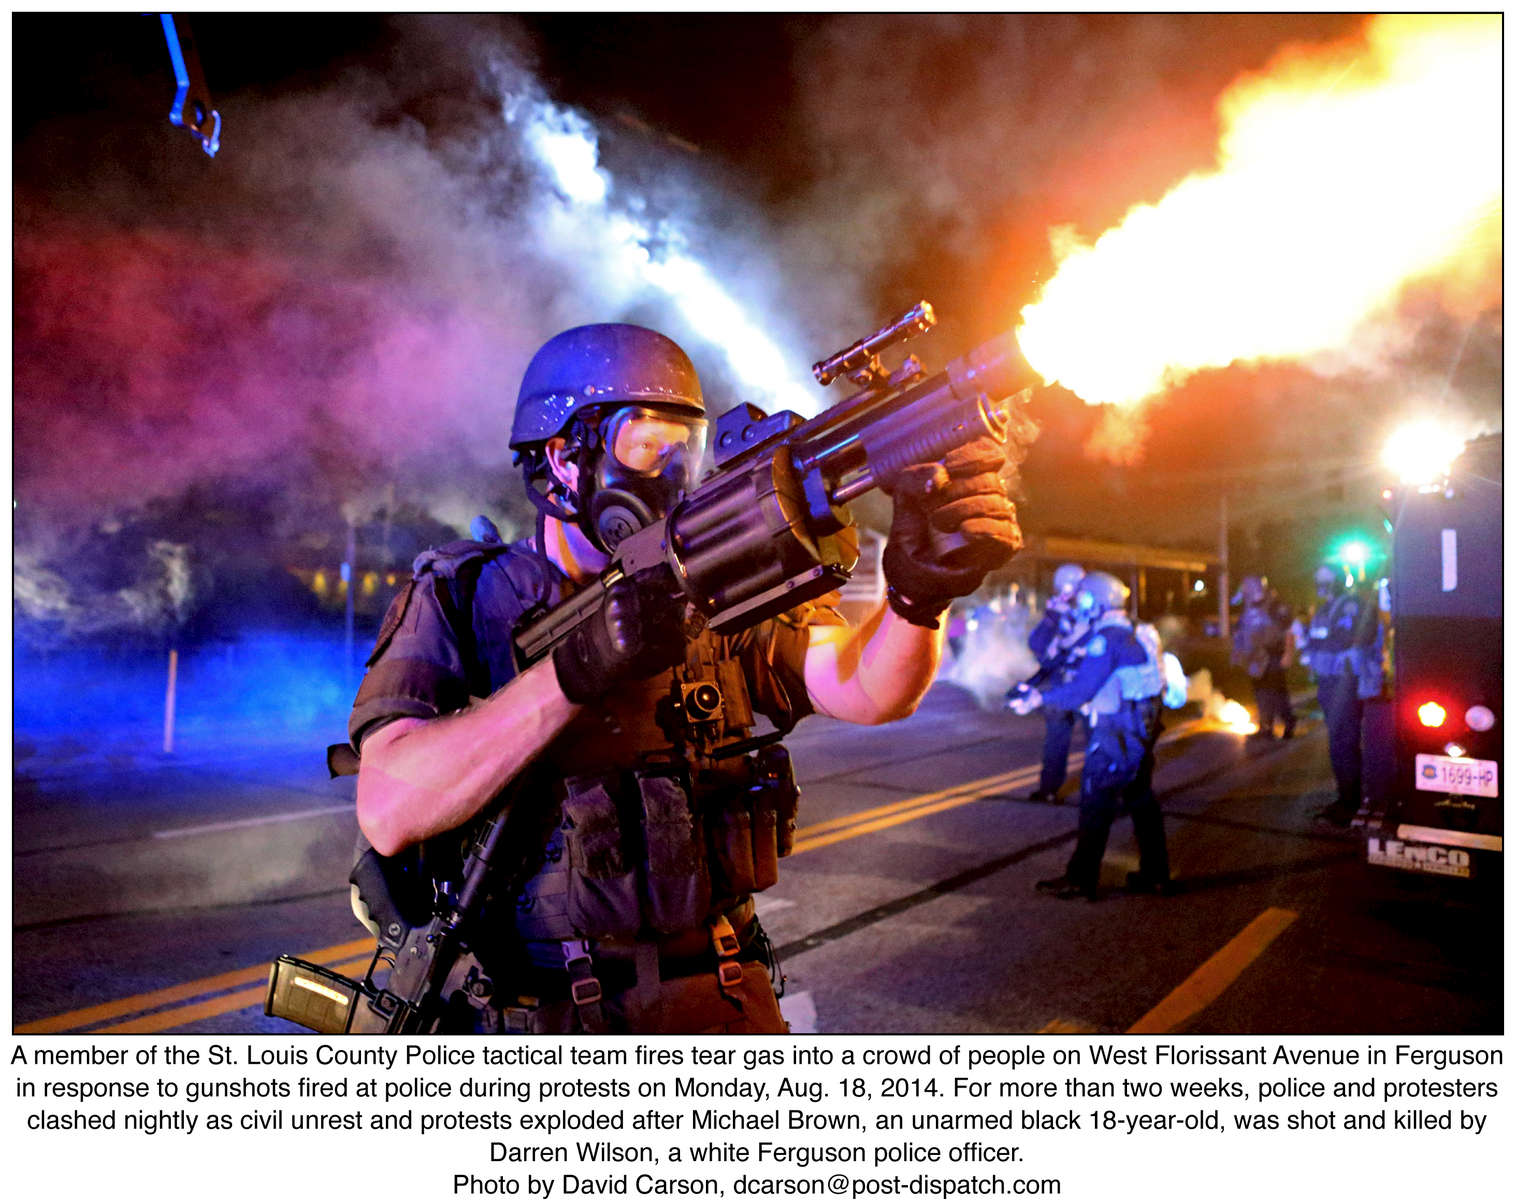 A member of the St. Louis County Police tactical team fires tear gas into a crowd of people on West Florissant Avenue in Ferguson in response to gunshots fired at police during protests on Monday, Aug. 18, 2014. For more than two weeks, police and protesters clashed nightly as civil unrest and protests exploded after Michael Brown, an unarmed black 18-year-old, was shot and killed by Darren Wilson, a white Ferguson police officer.Photo by David Carson, dcarson@post-dispatch.com